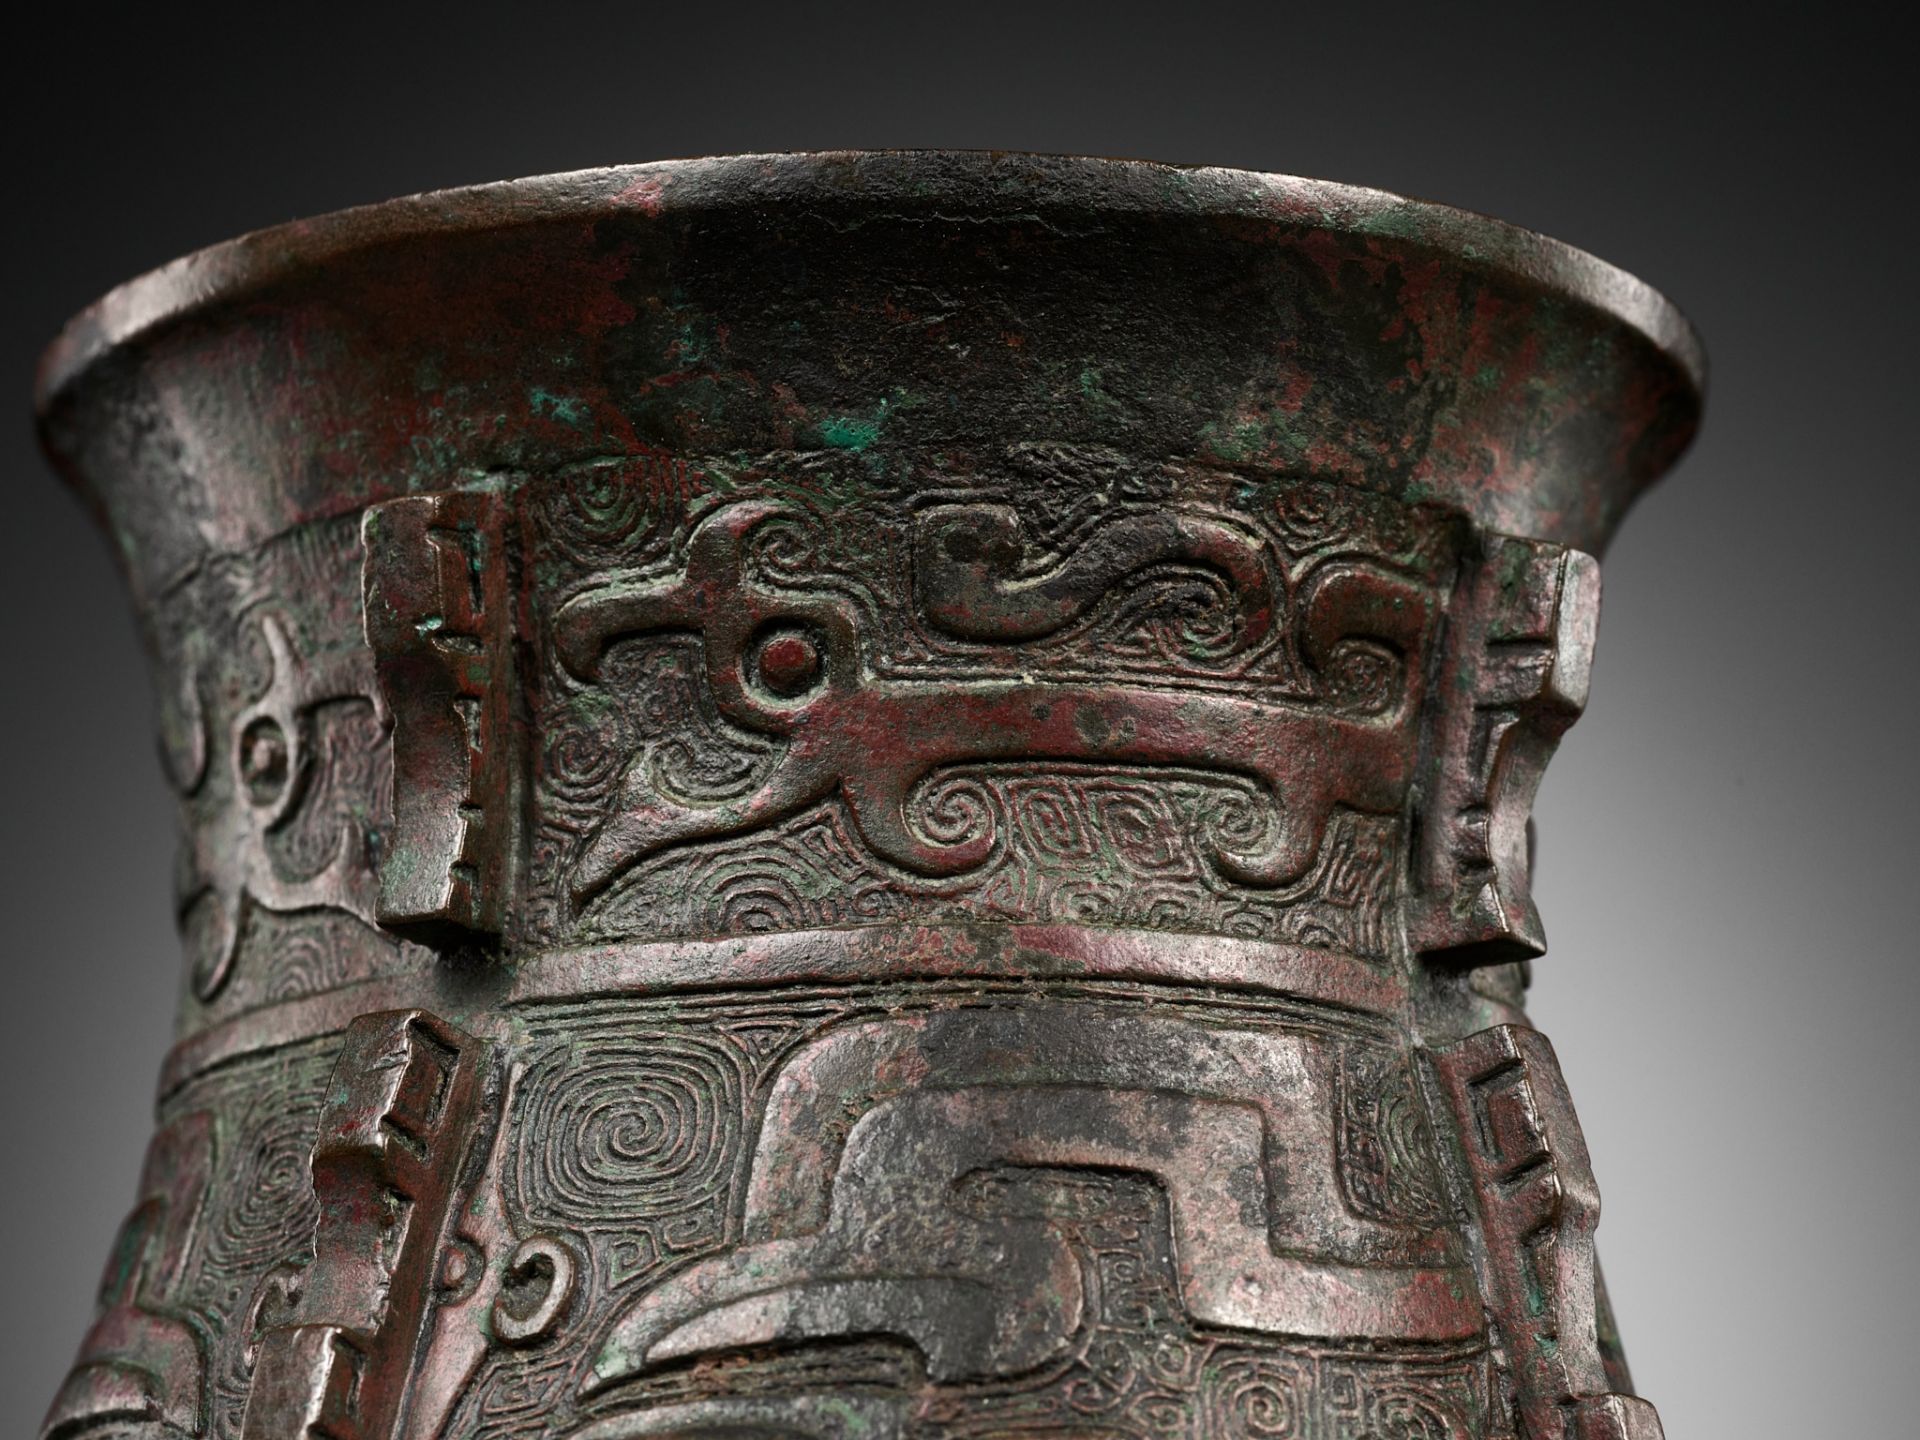 A RARE BRONZE RITUAL WINE VESSEL, ZHI, SHANG DYNASTY, CHINA, 13TH-12TH CENTURY BC - Image 9 of 25